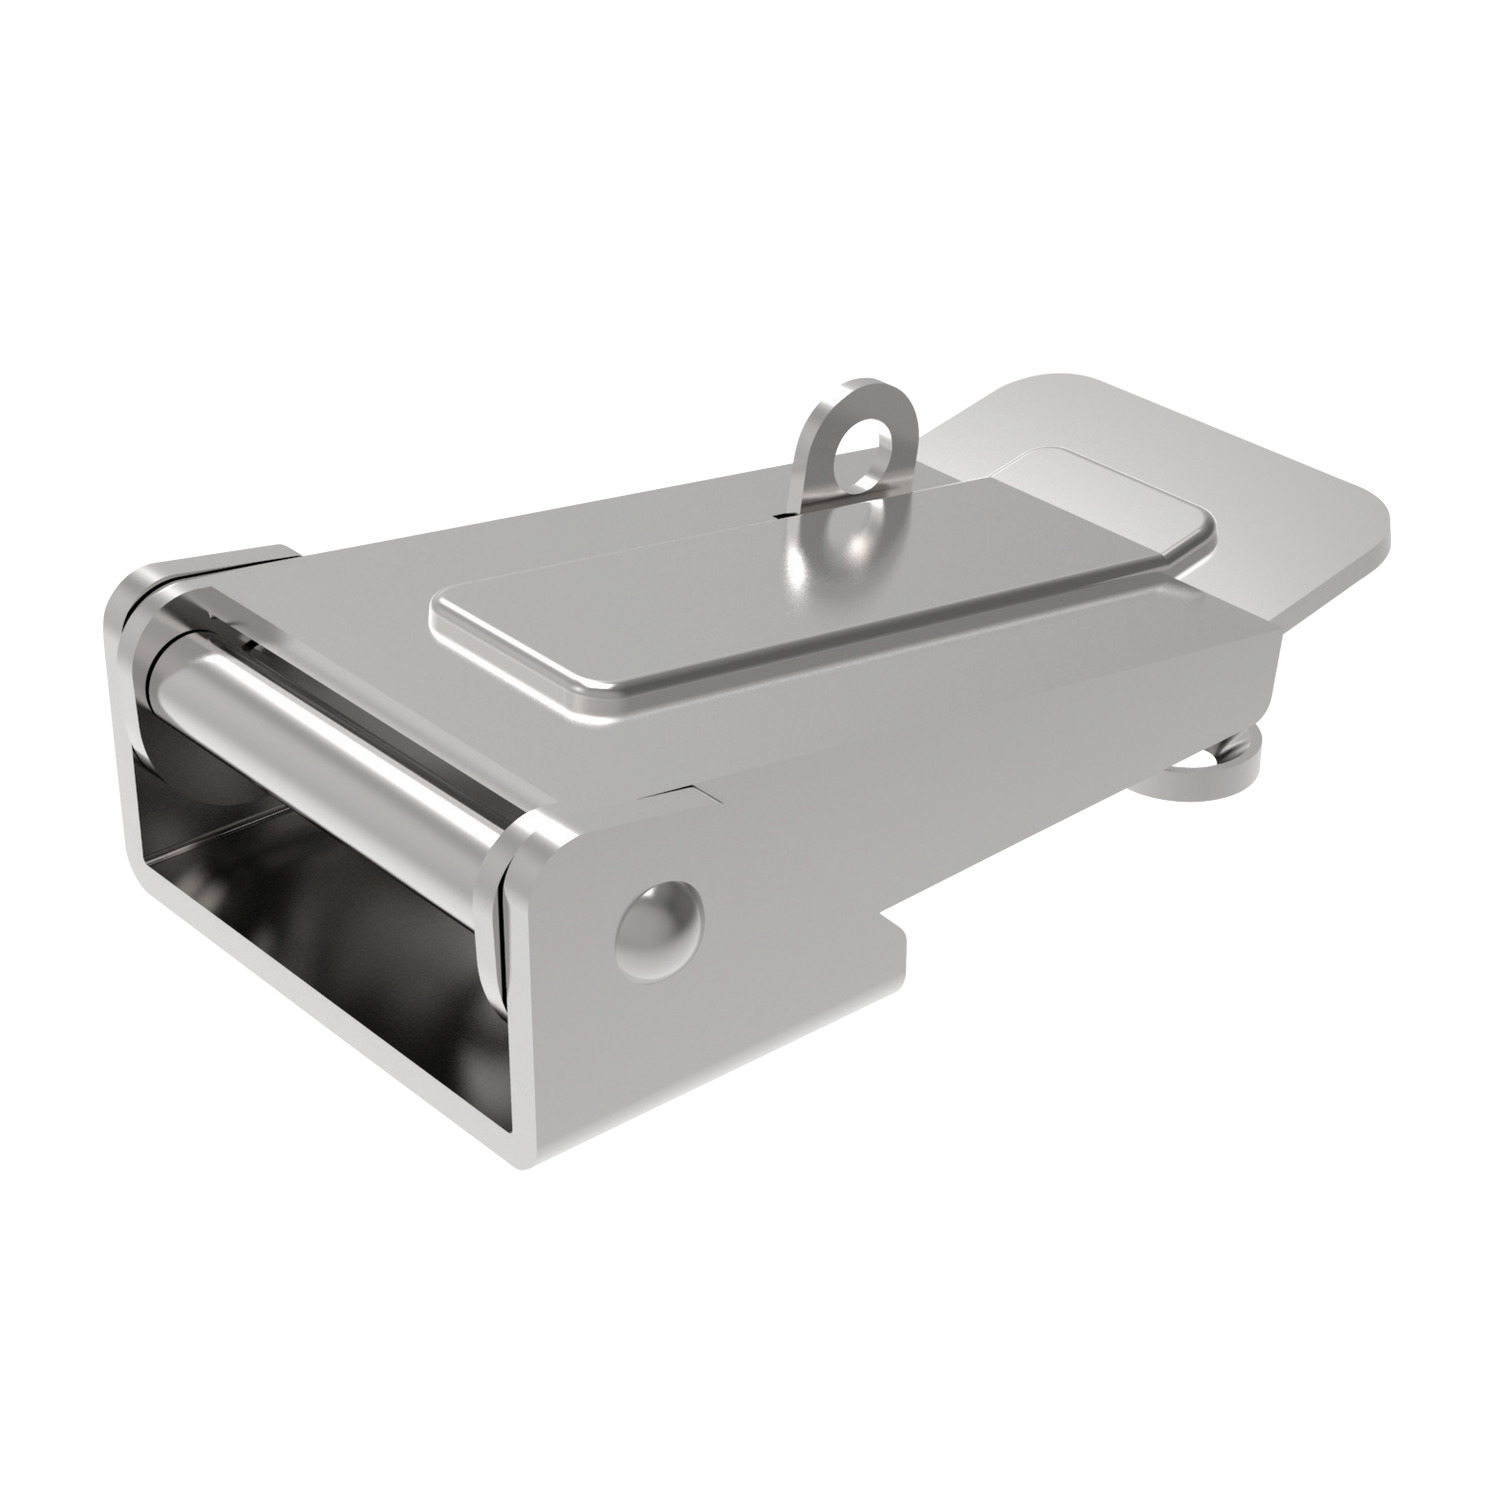 Toggle Latches An adjustable draw type toggle latch with padlock hasp for padlocks of up to 6mm diameter. Made from zinc plated steel and supplied with counterstrike.